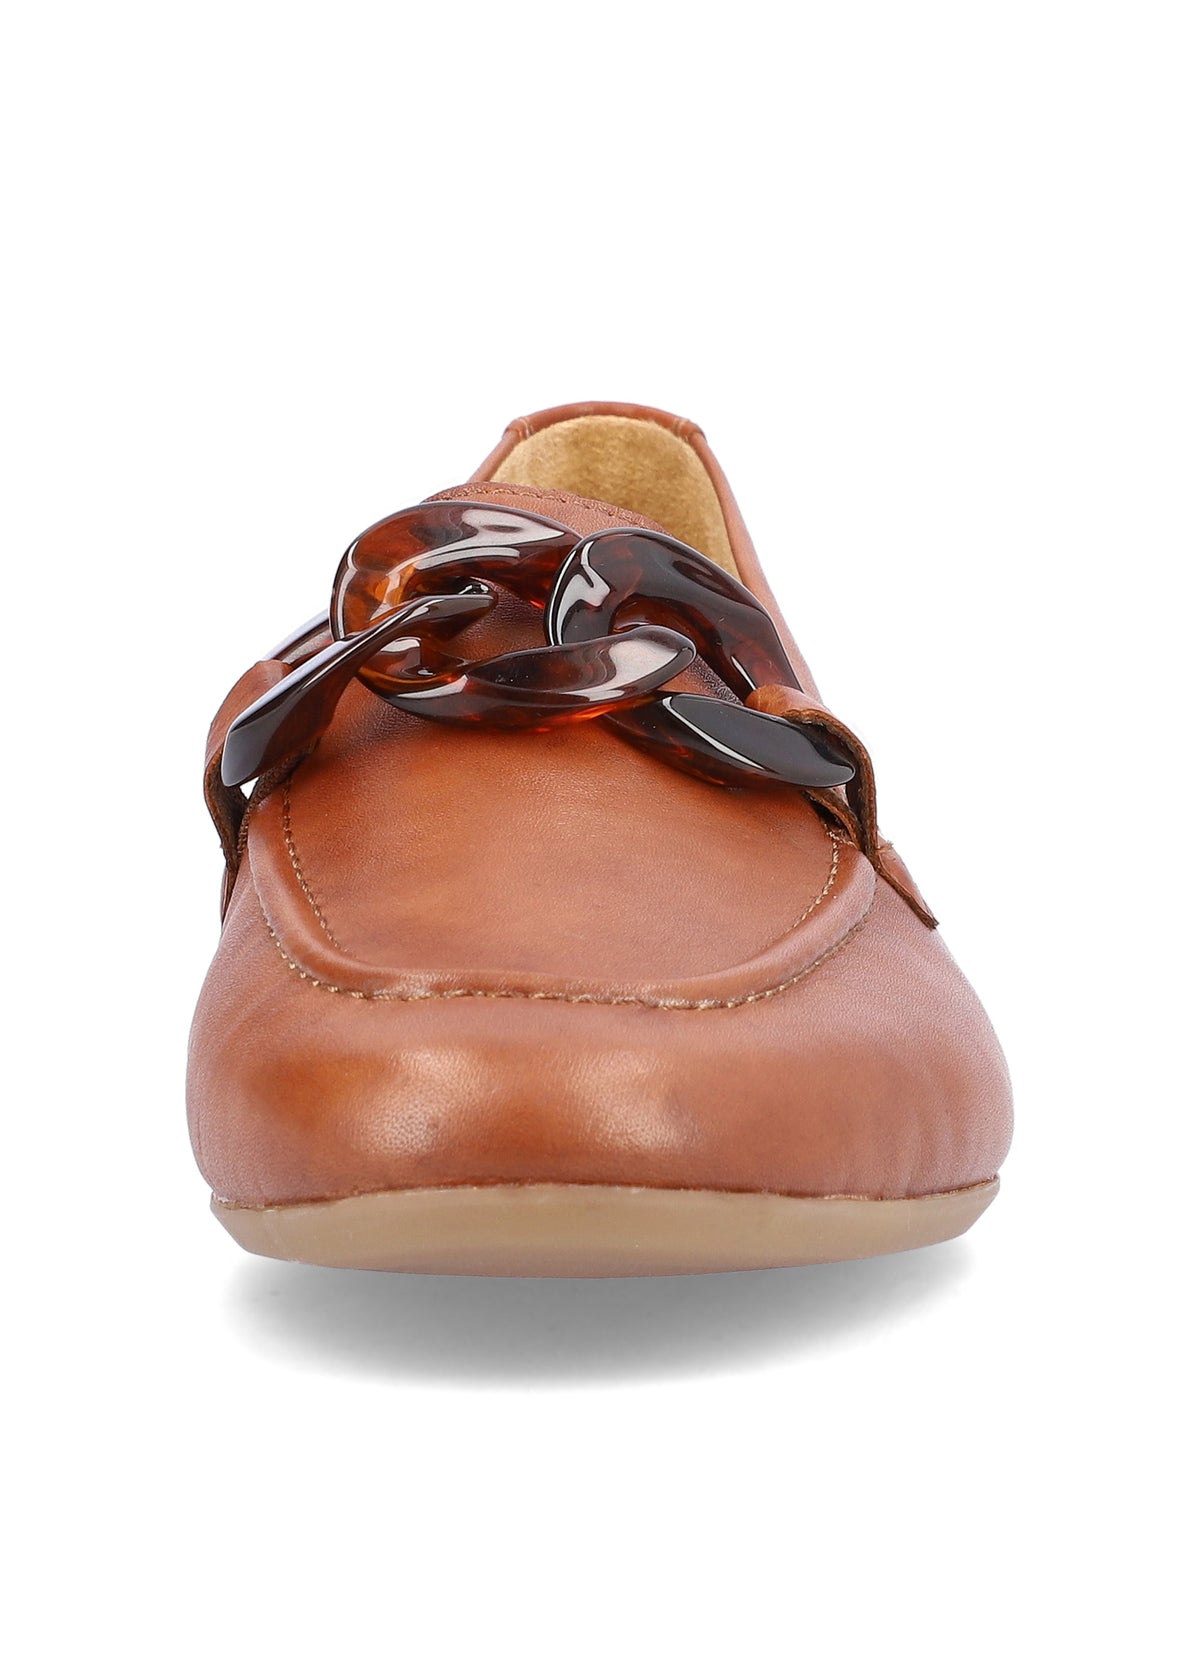 Loafers - brown top leather, buckle decoration